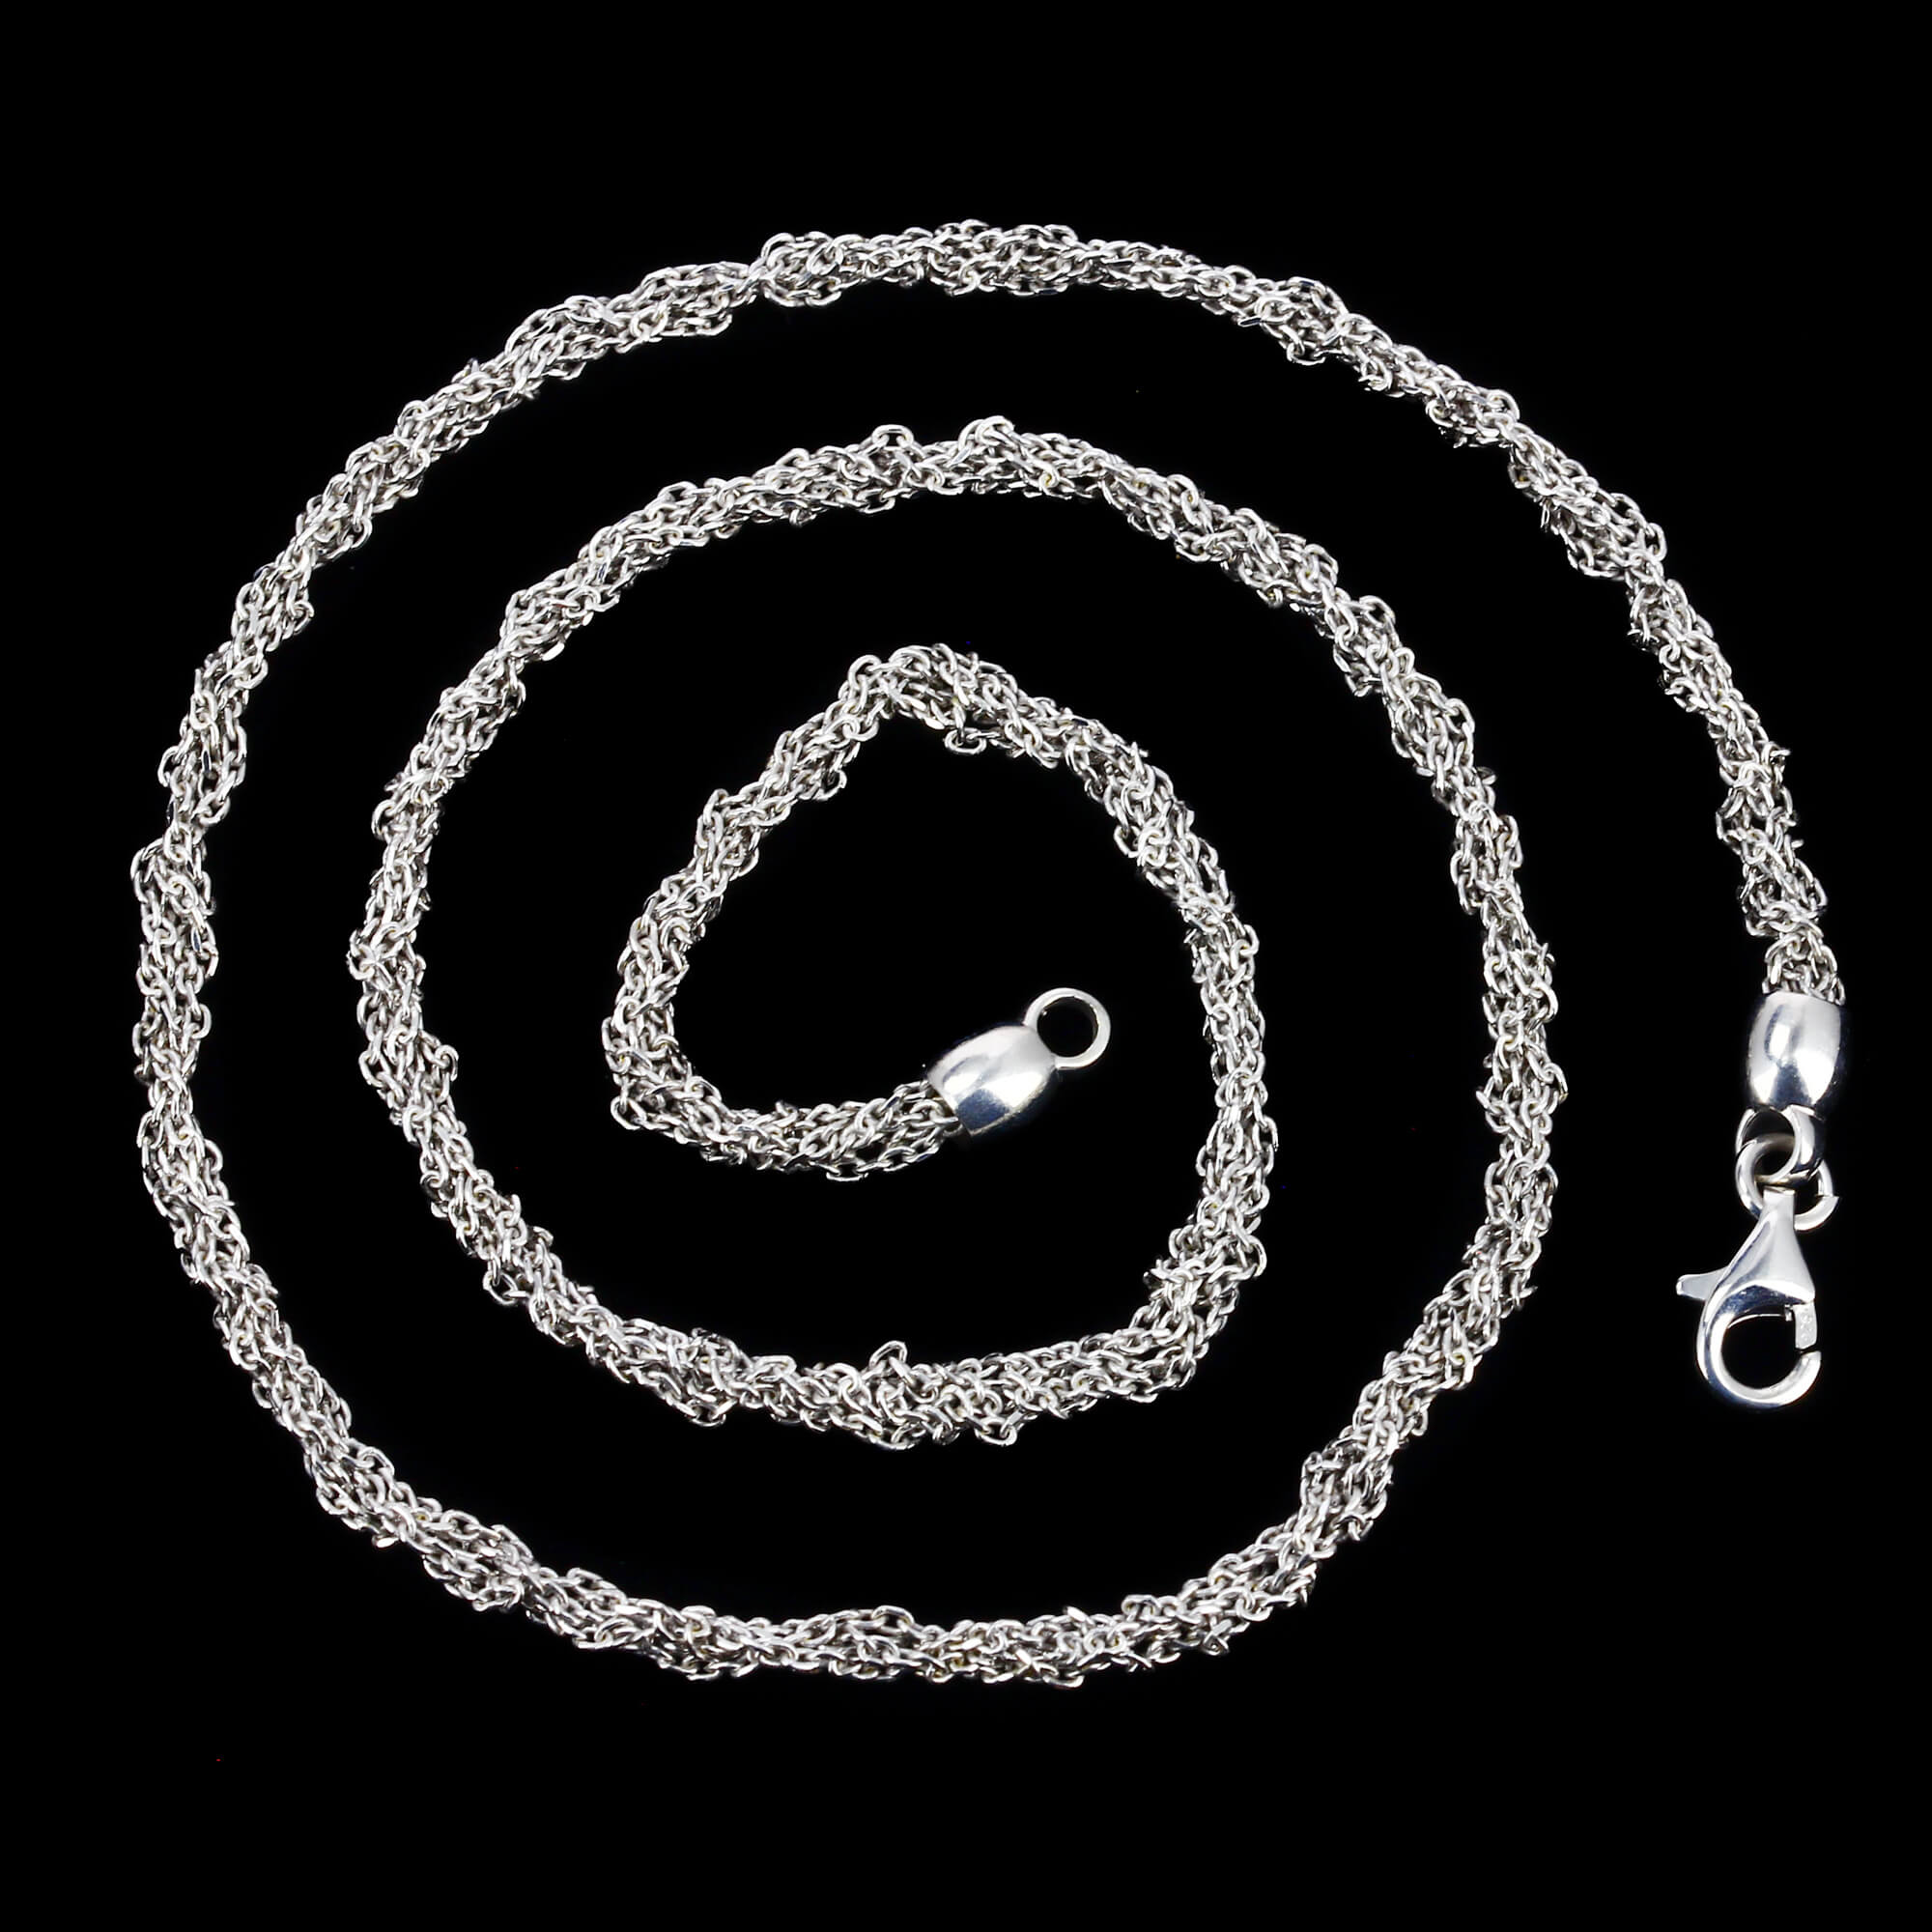 Short interwoven necklace from silver